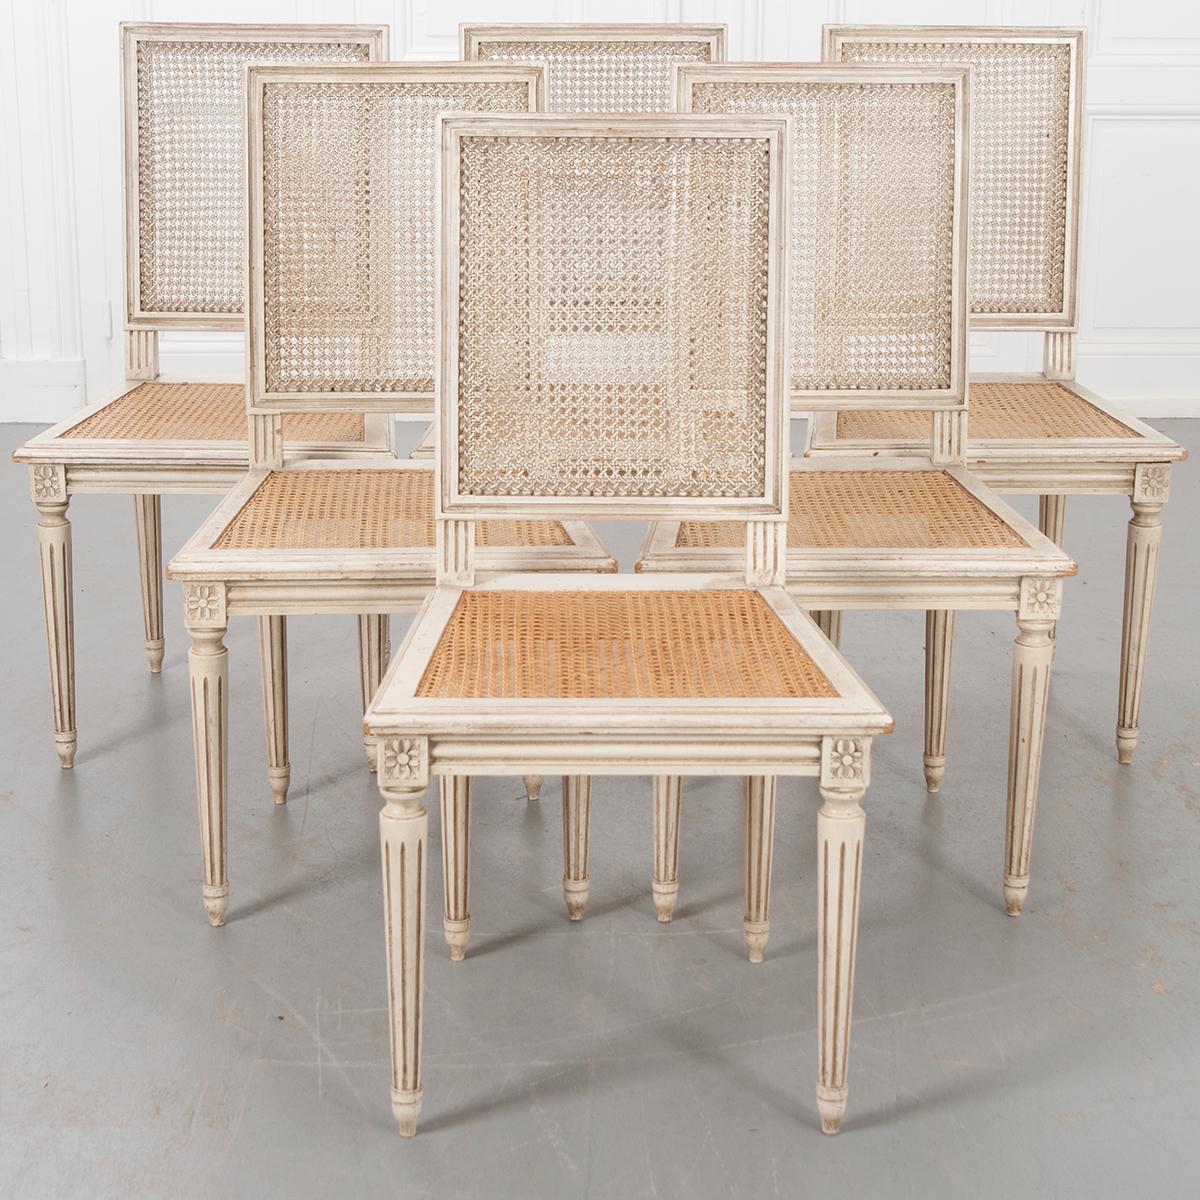 A set of six Louis XVI-style painted cane dining chairs. The seats are more recent and are in great condition. The chairs feature simple lines with fluted legs. The height of the seat is 17-½”.